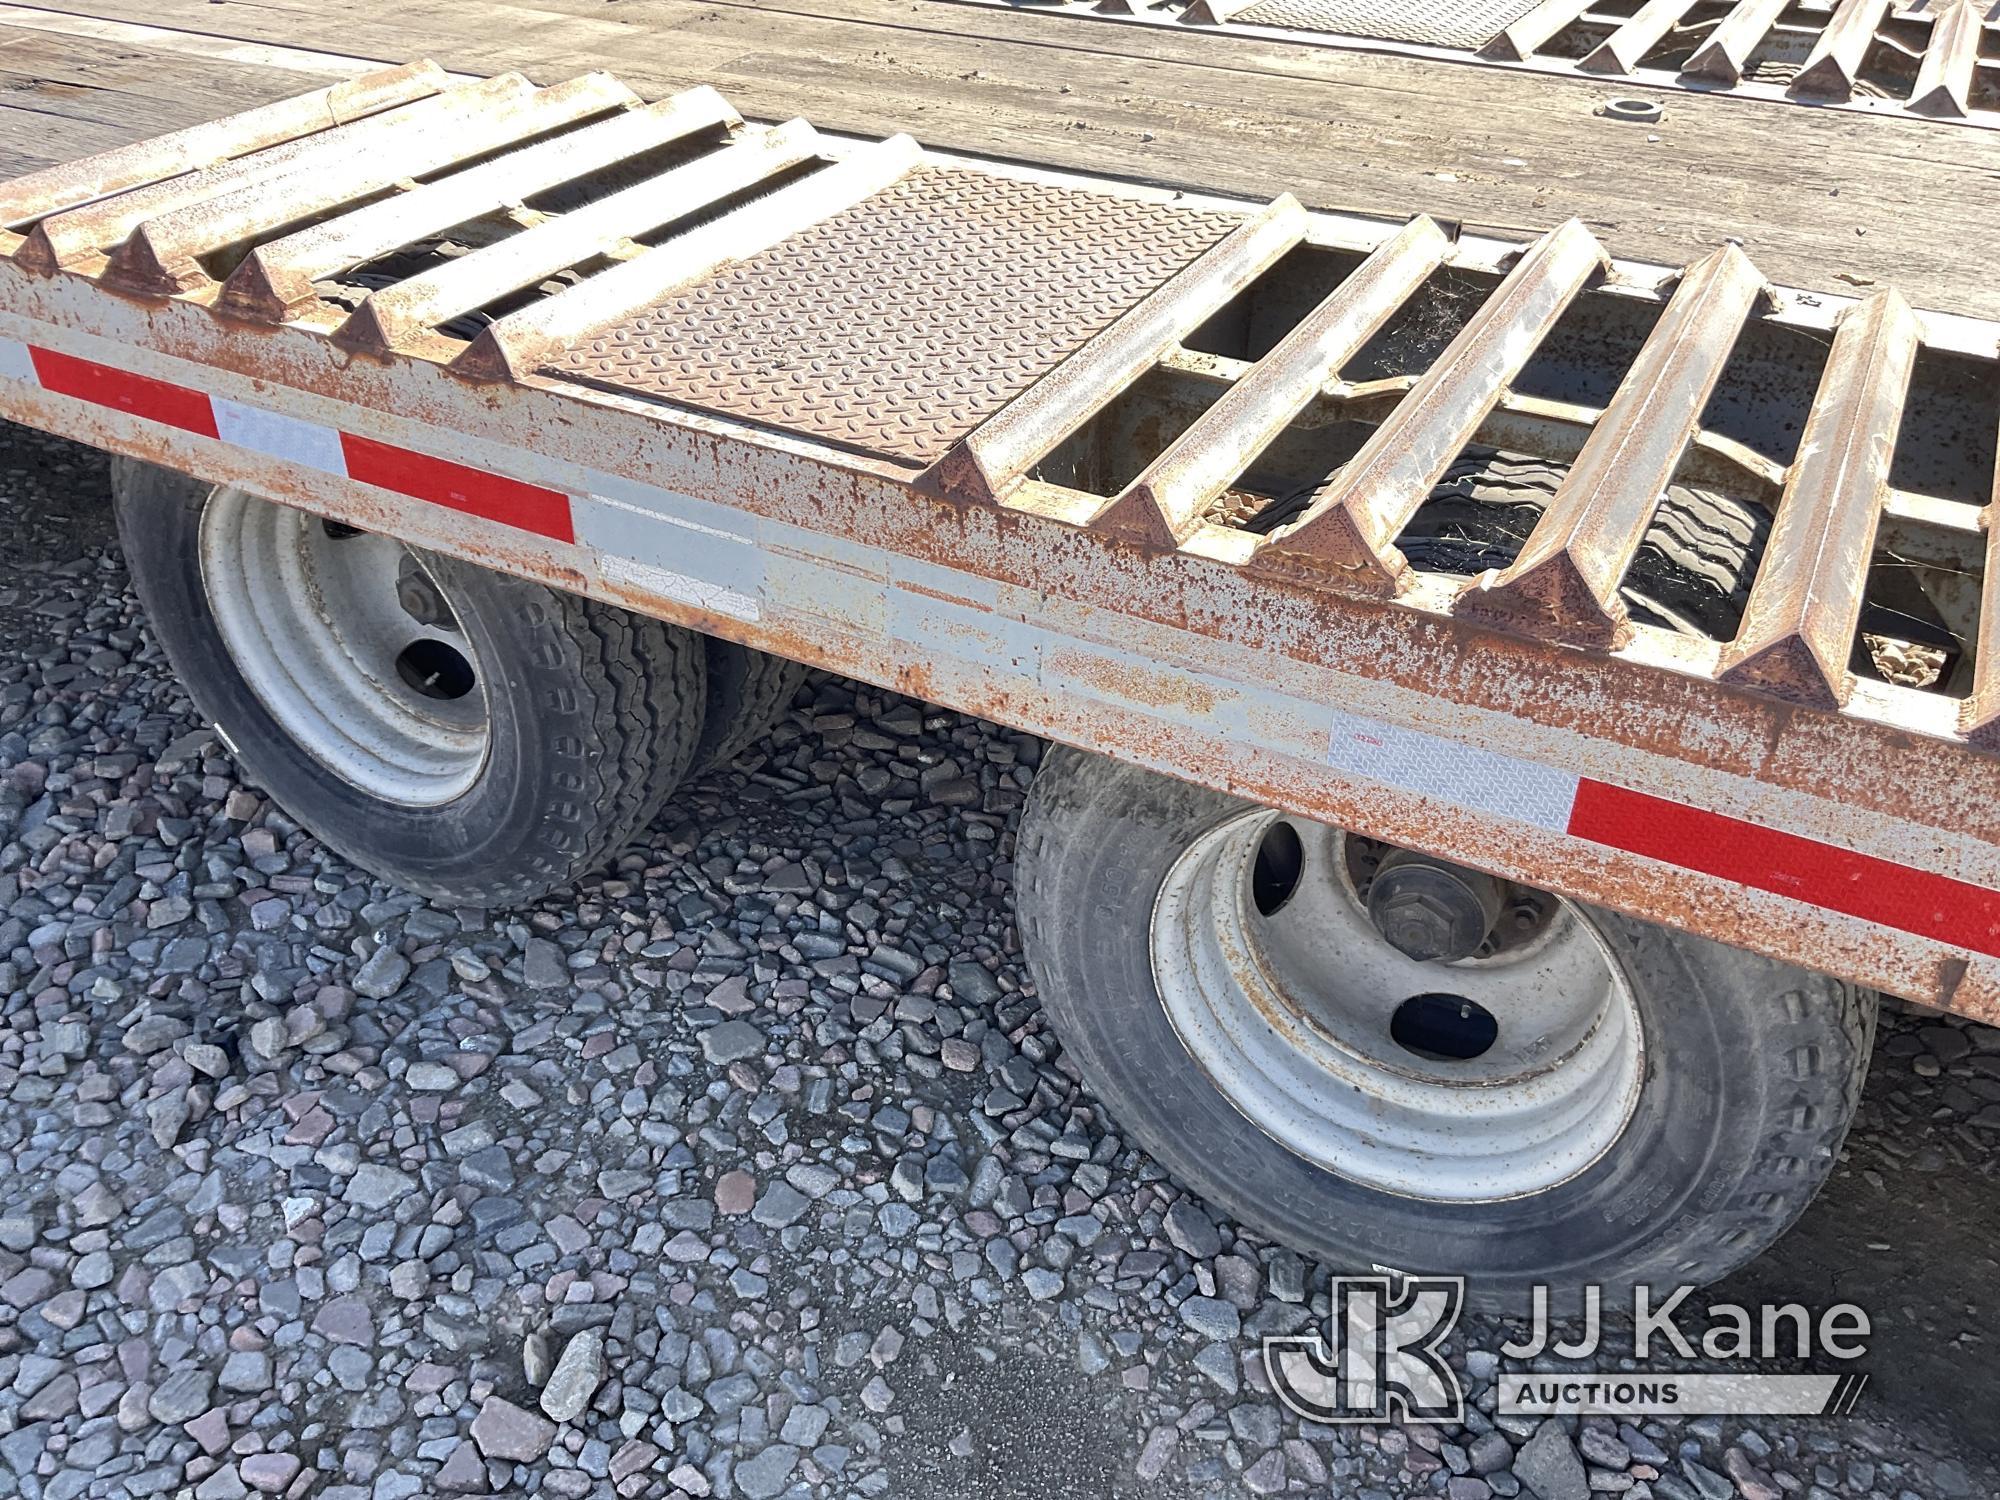 (Dixon, CA) 1995 Interstate High Flatbed Trailer, Deck Dimensions: Width 7ft 10in, Length 25ft Road